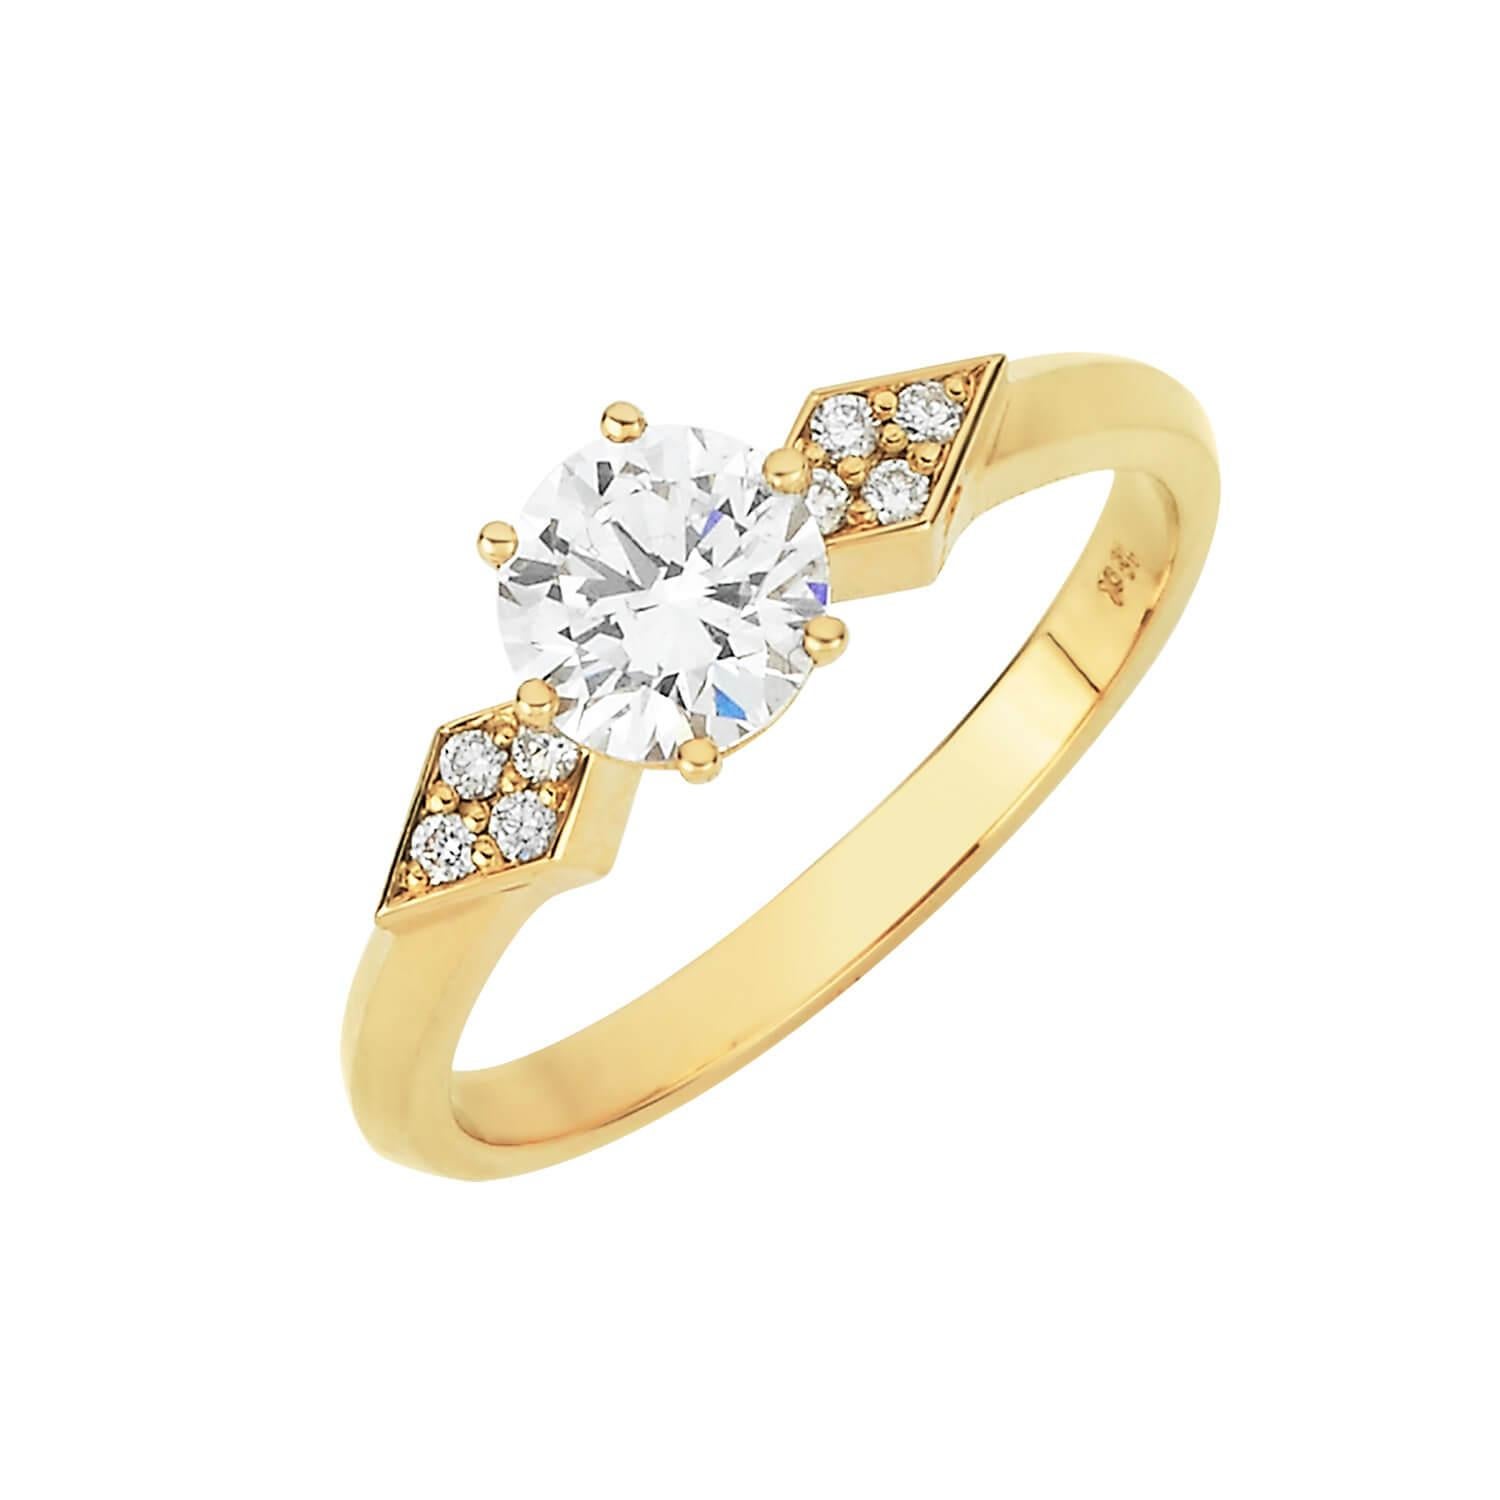 The Dahlia Engagement Ring is the symbol of the spark of love.

18k yellow gold engagement ring, with a centre diamond of 0.7ct, round brilliant cut, D colour, SI2 clarity. Set with 8 1.25mm brilliant cut diamonds.

This piece will be specially